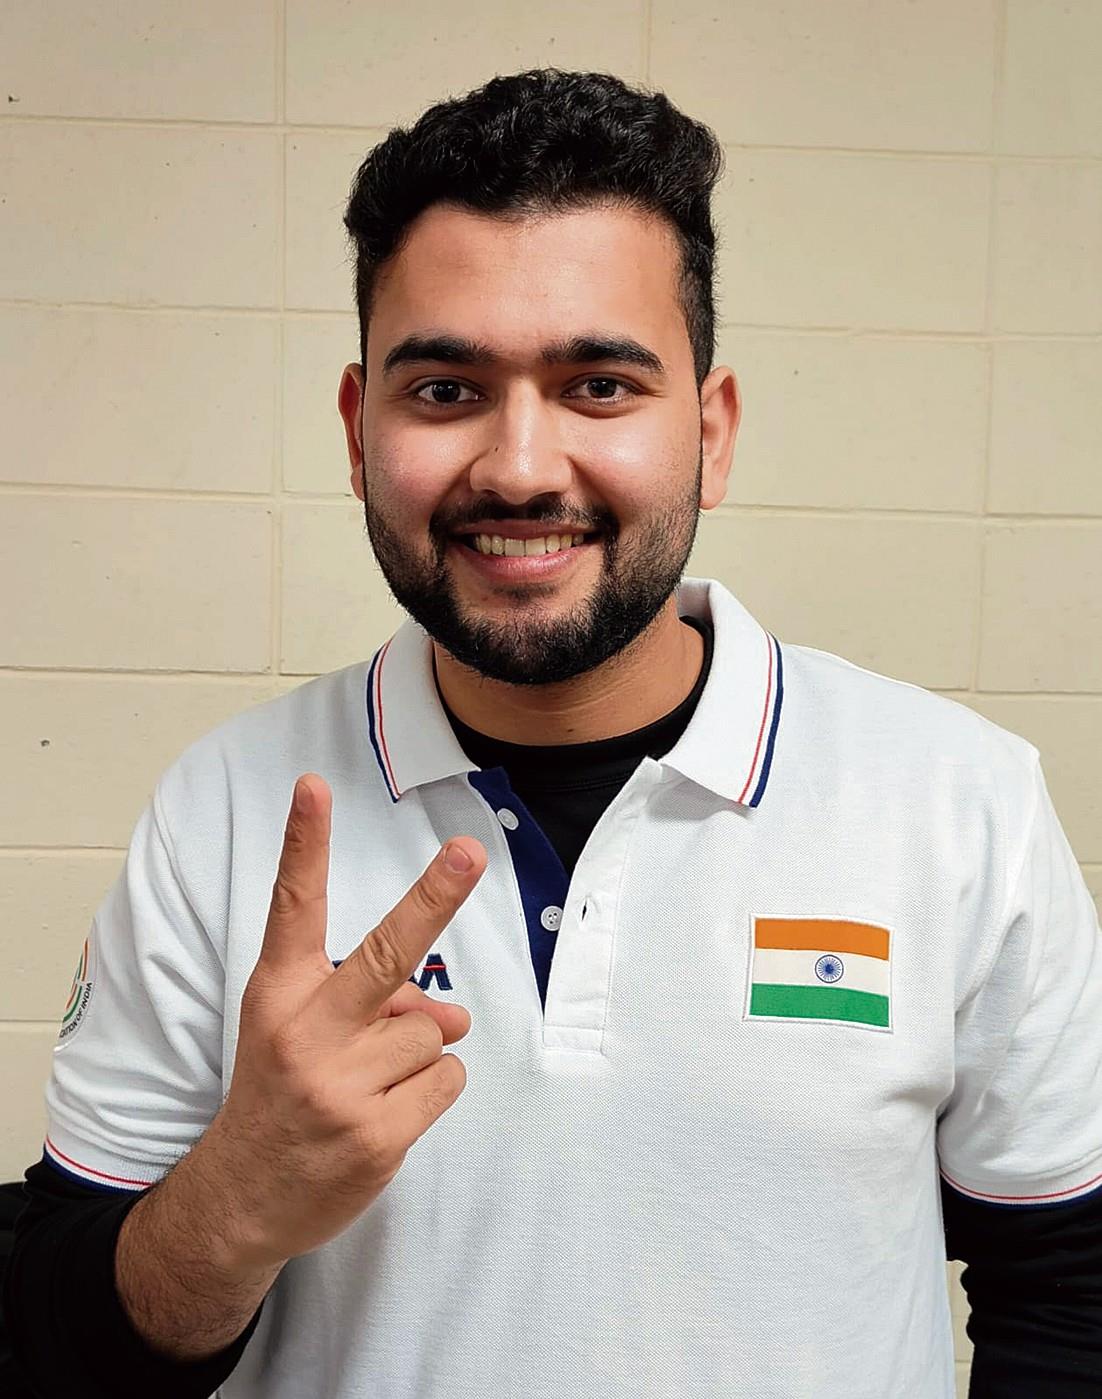 Bhanwala wins bronze and India’s 12th Paris Olympics quota place